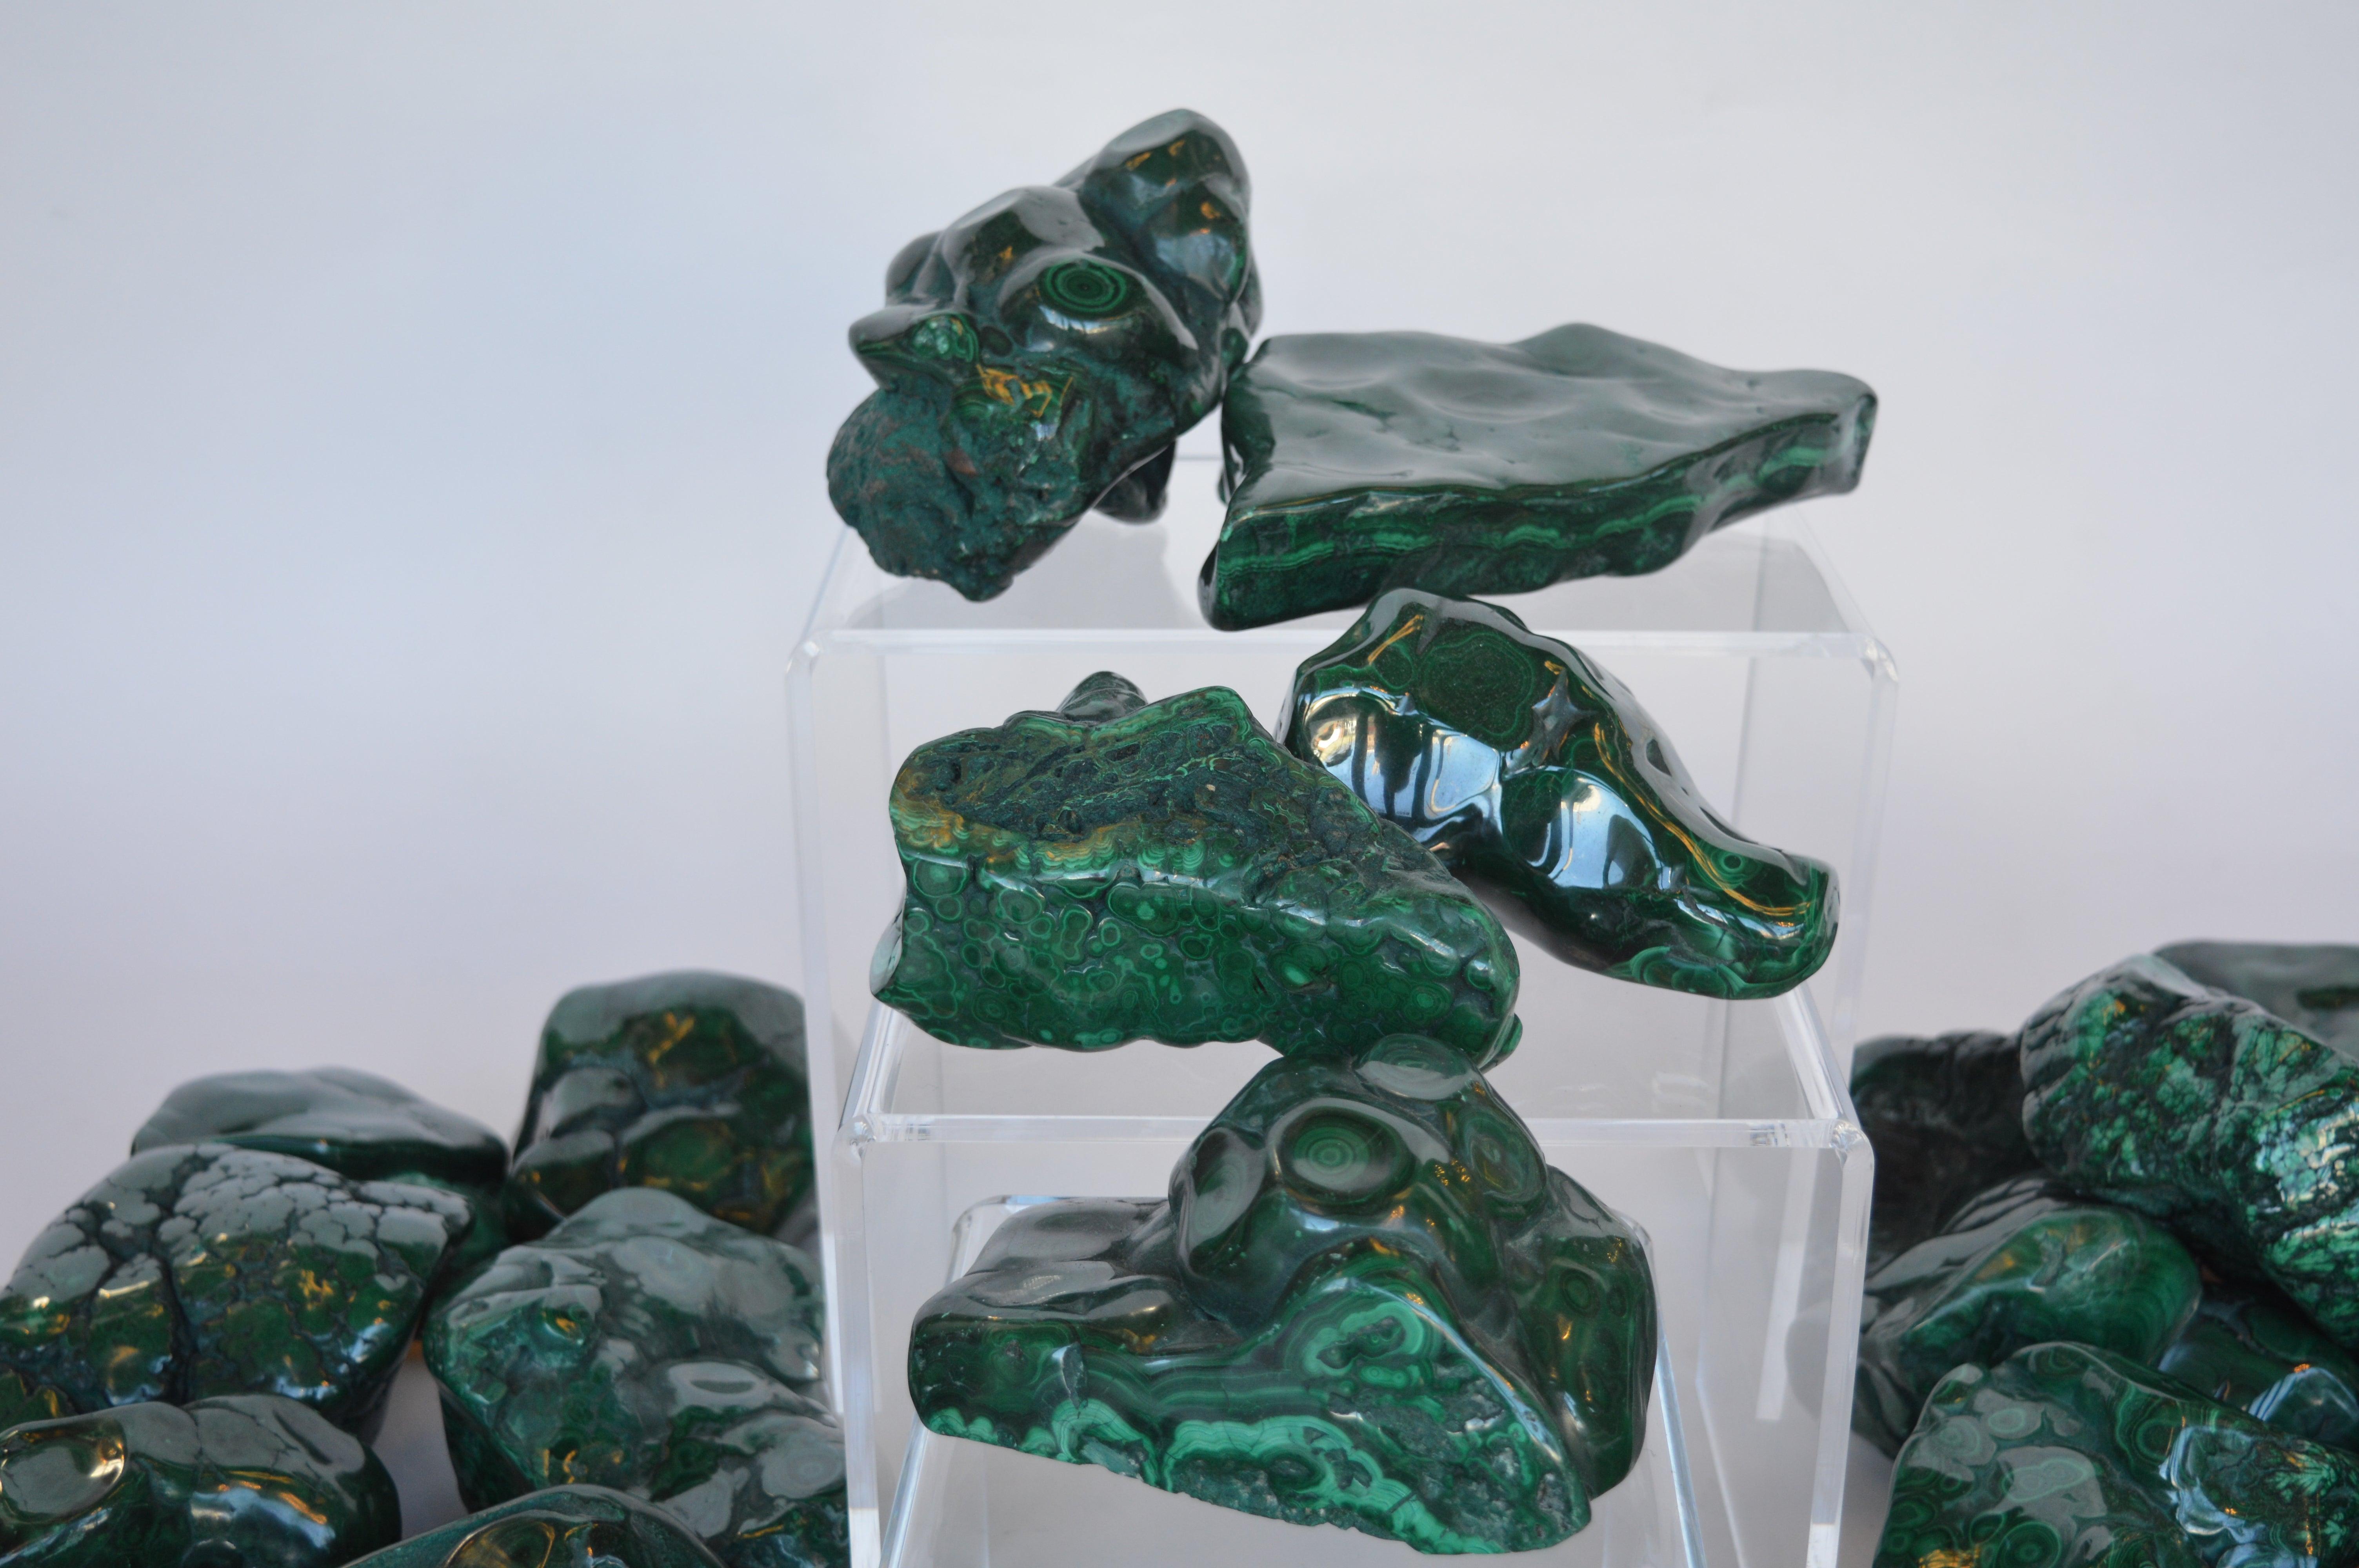 Collection of many Malachite stones, all polished.
Sizes and shapes all very and unique.